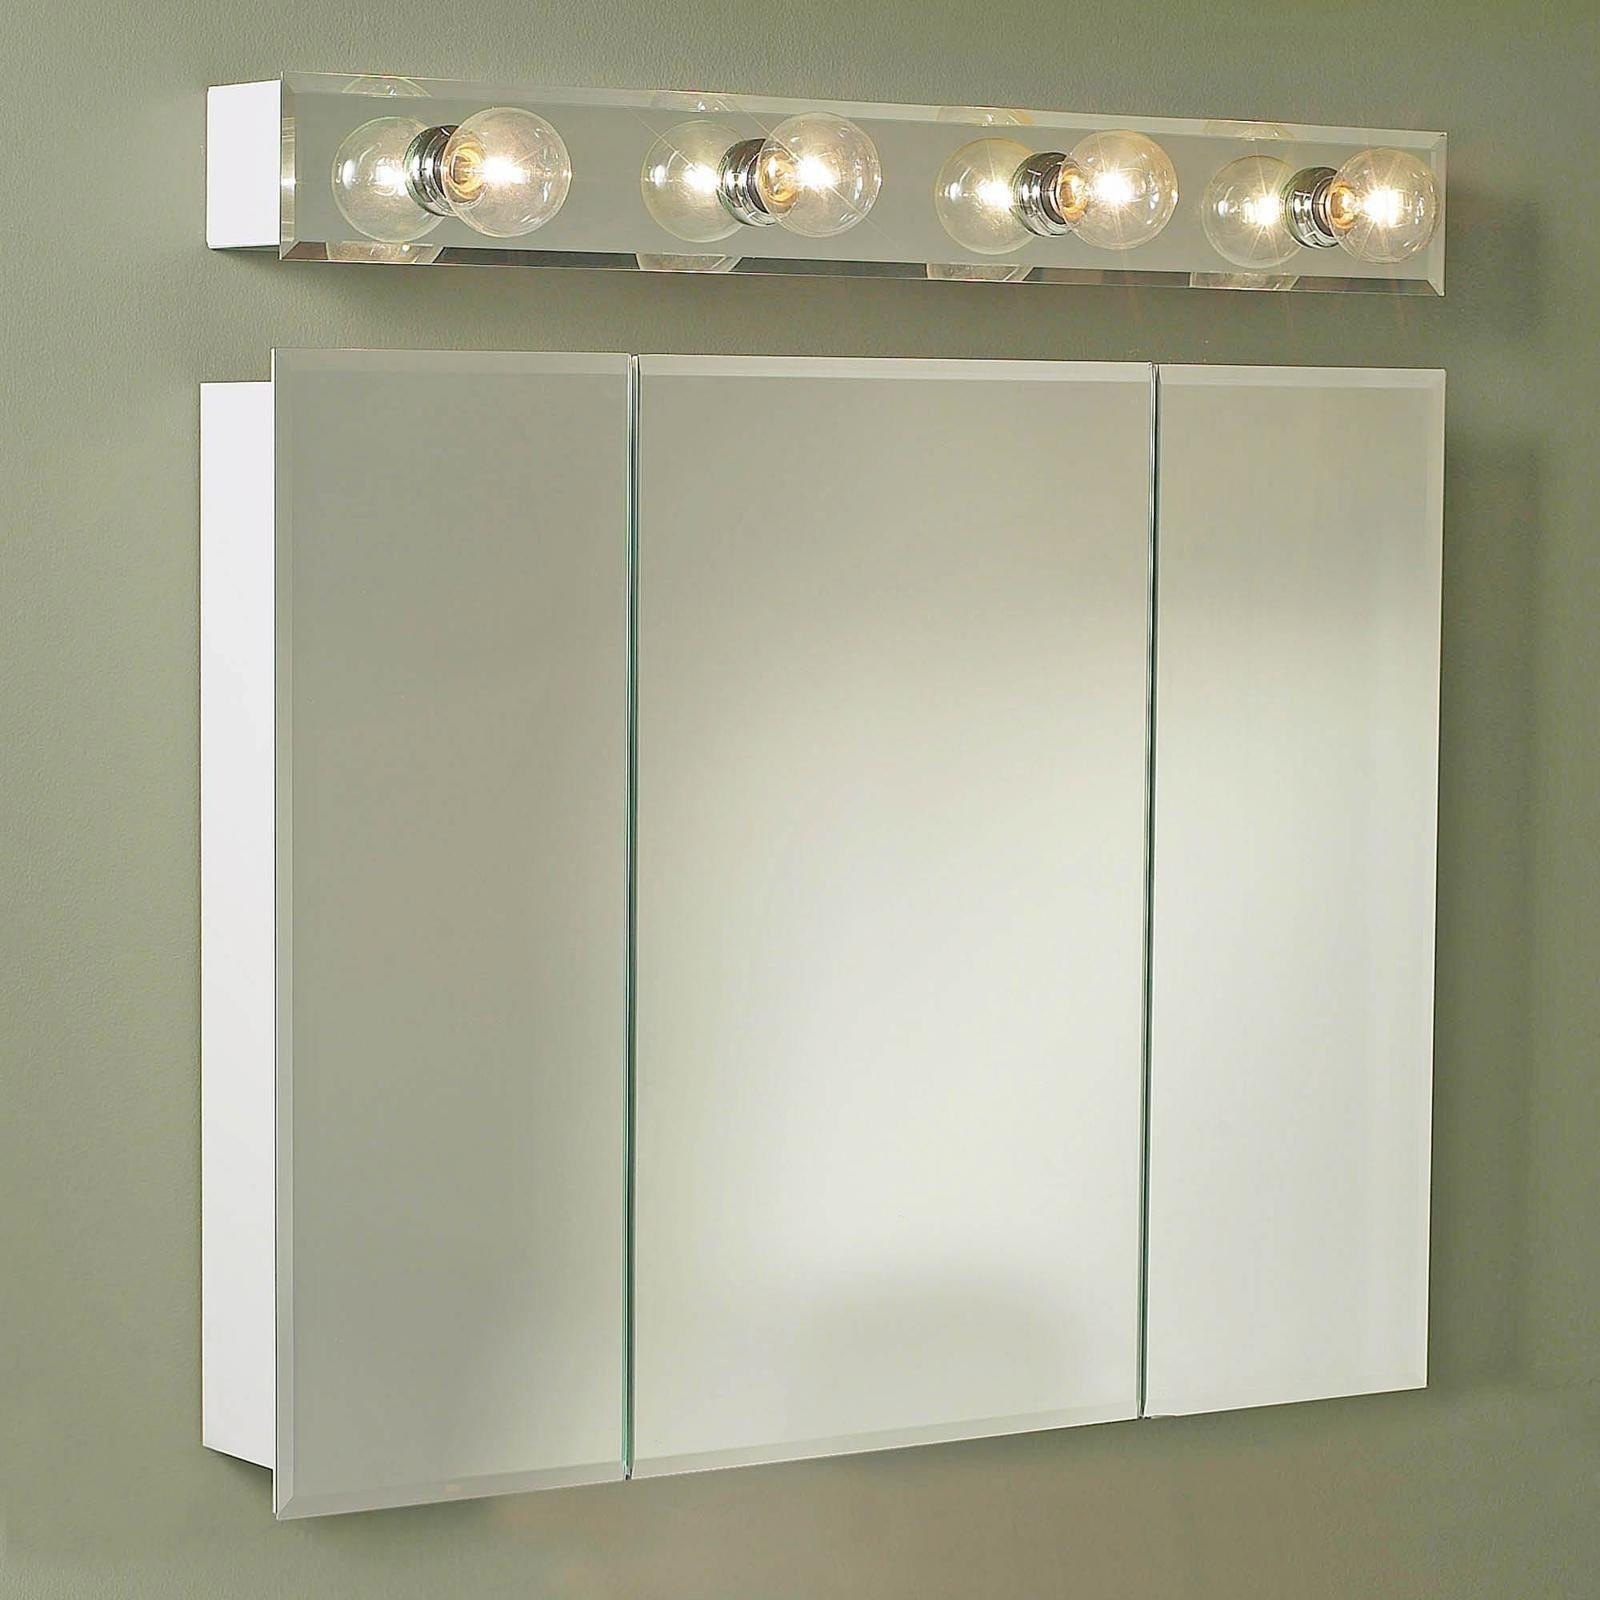 Lowes Bathroom Storage
 20 Collection of 3 Door Medicine Cabinets With Mirrors